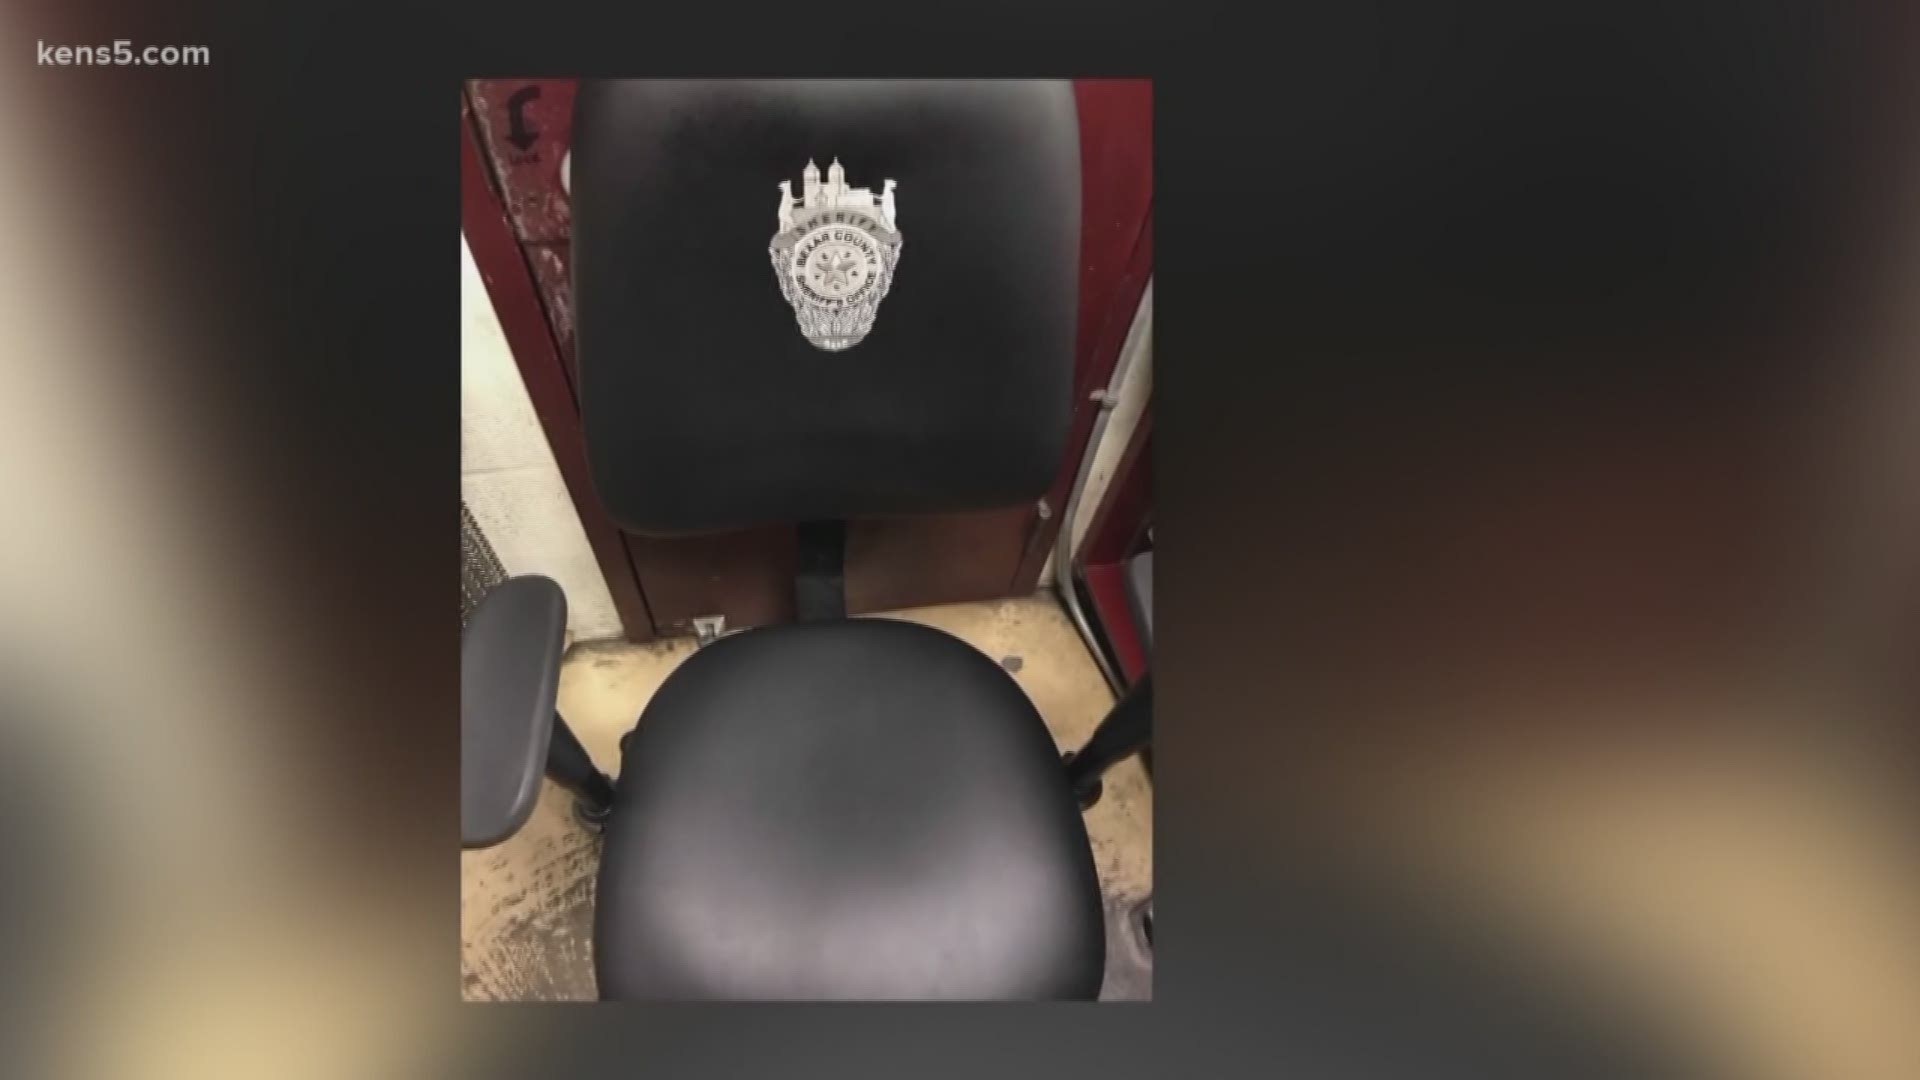 How much is too much for an office chair? Especially when civil servants are spending your money? Well, $700 a chair wasn't too steep for the Bexar County Sheriff's Office. Eyewitness News Reporter Aaron Wright explains.